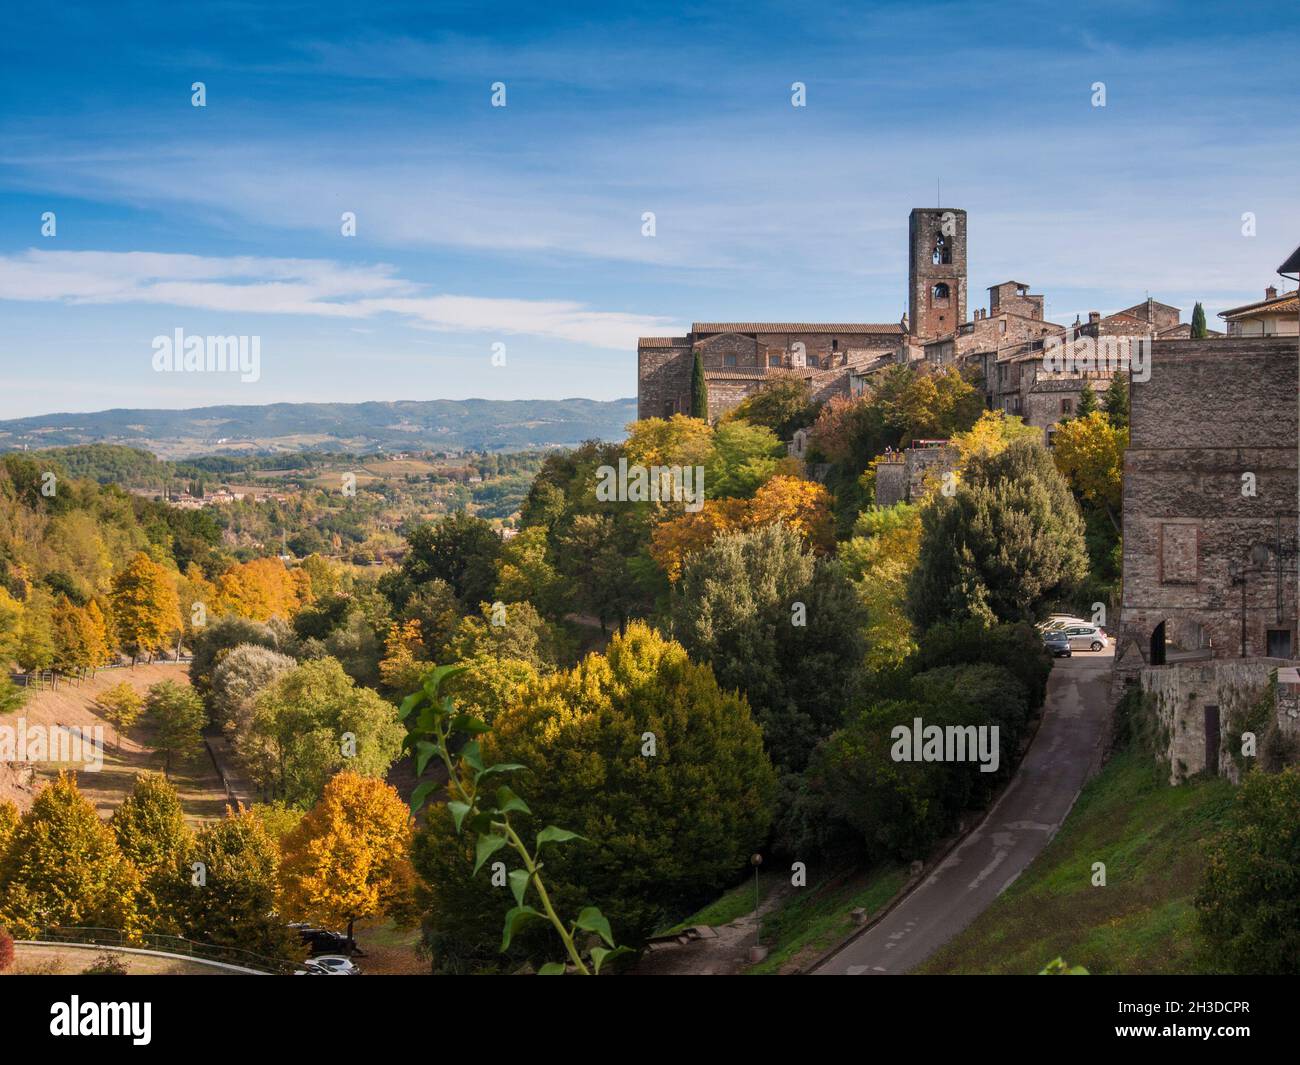 Italy, Tuscany, Siena, the village of the Colle val d'Elsa. Stock Photo